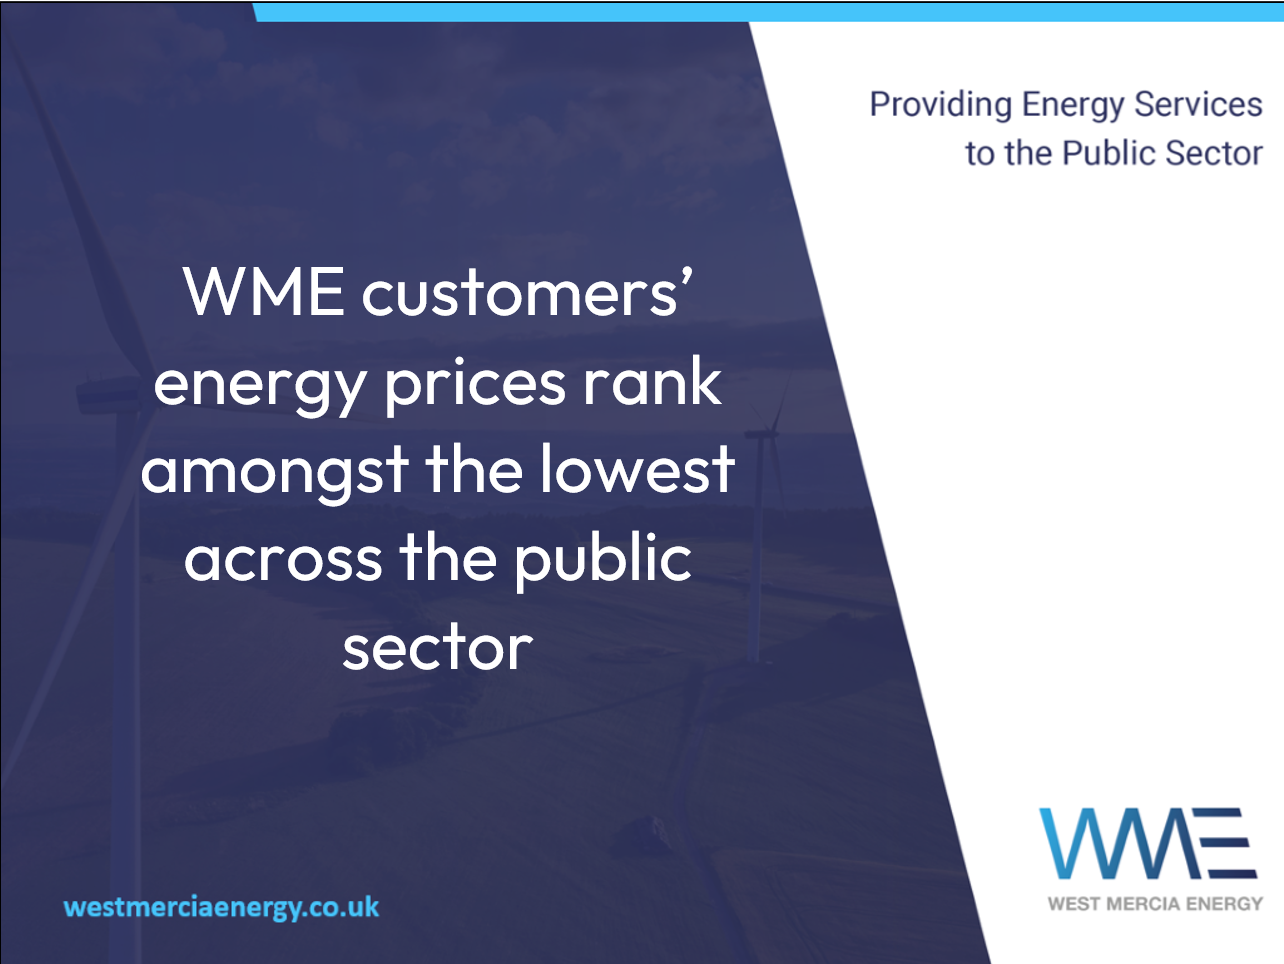 WME customers’ energy prices rank amongst the lowest across the public sector